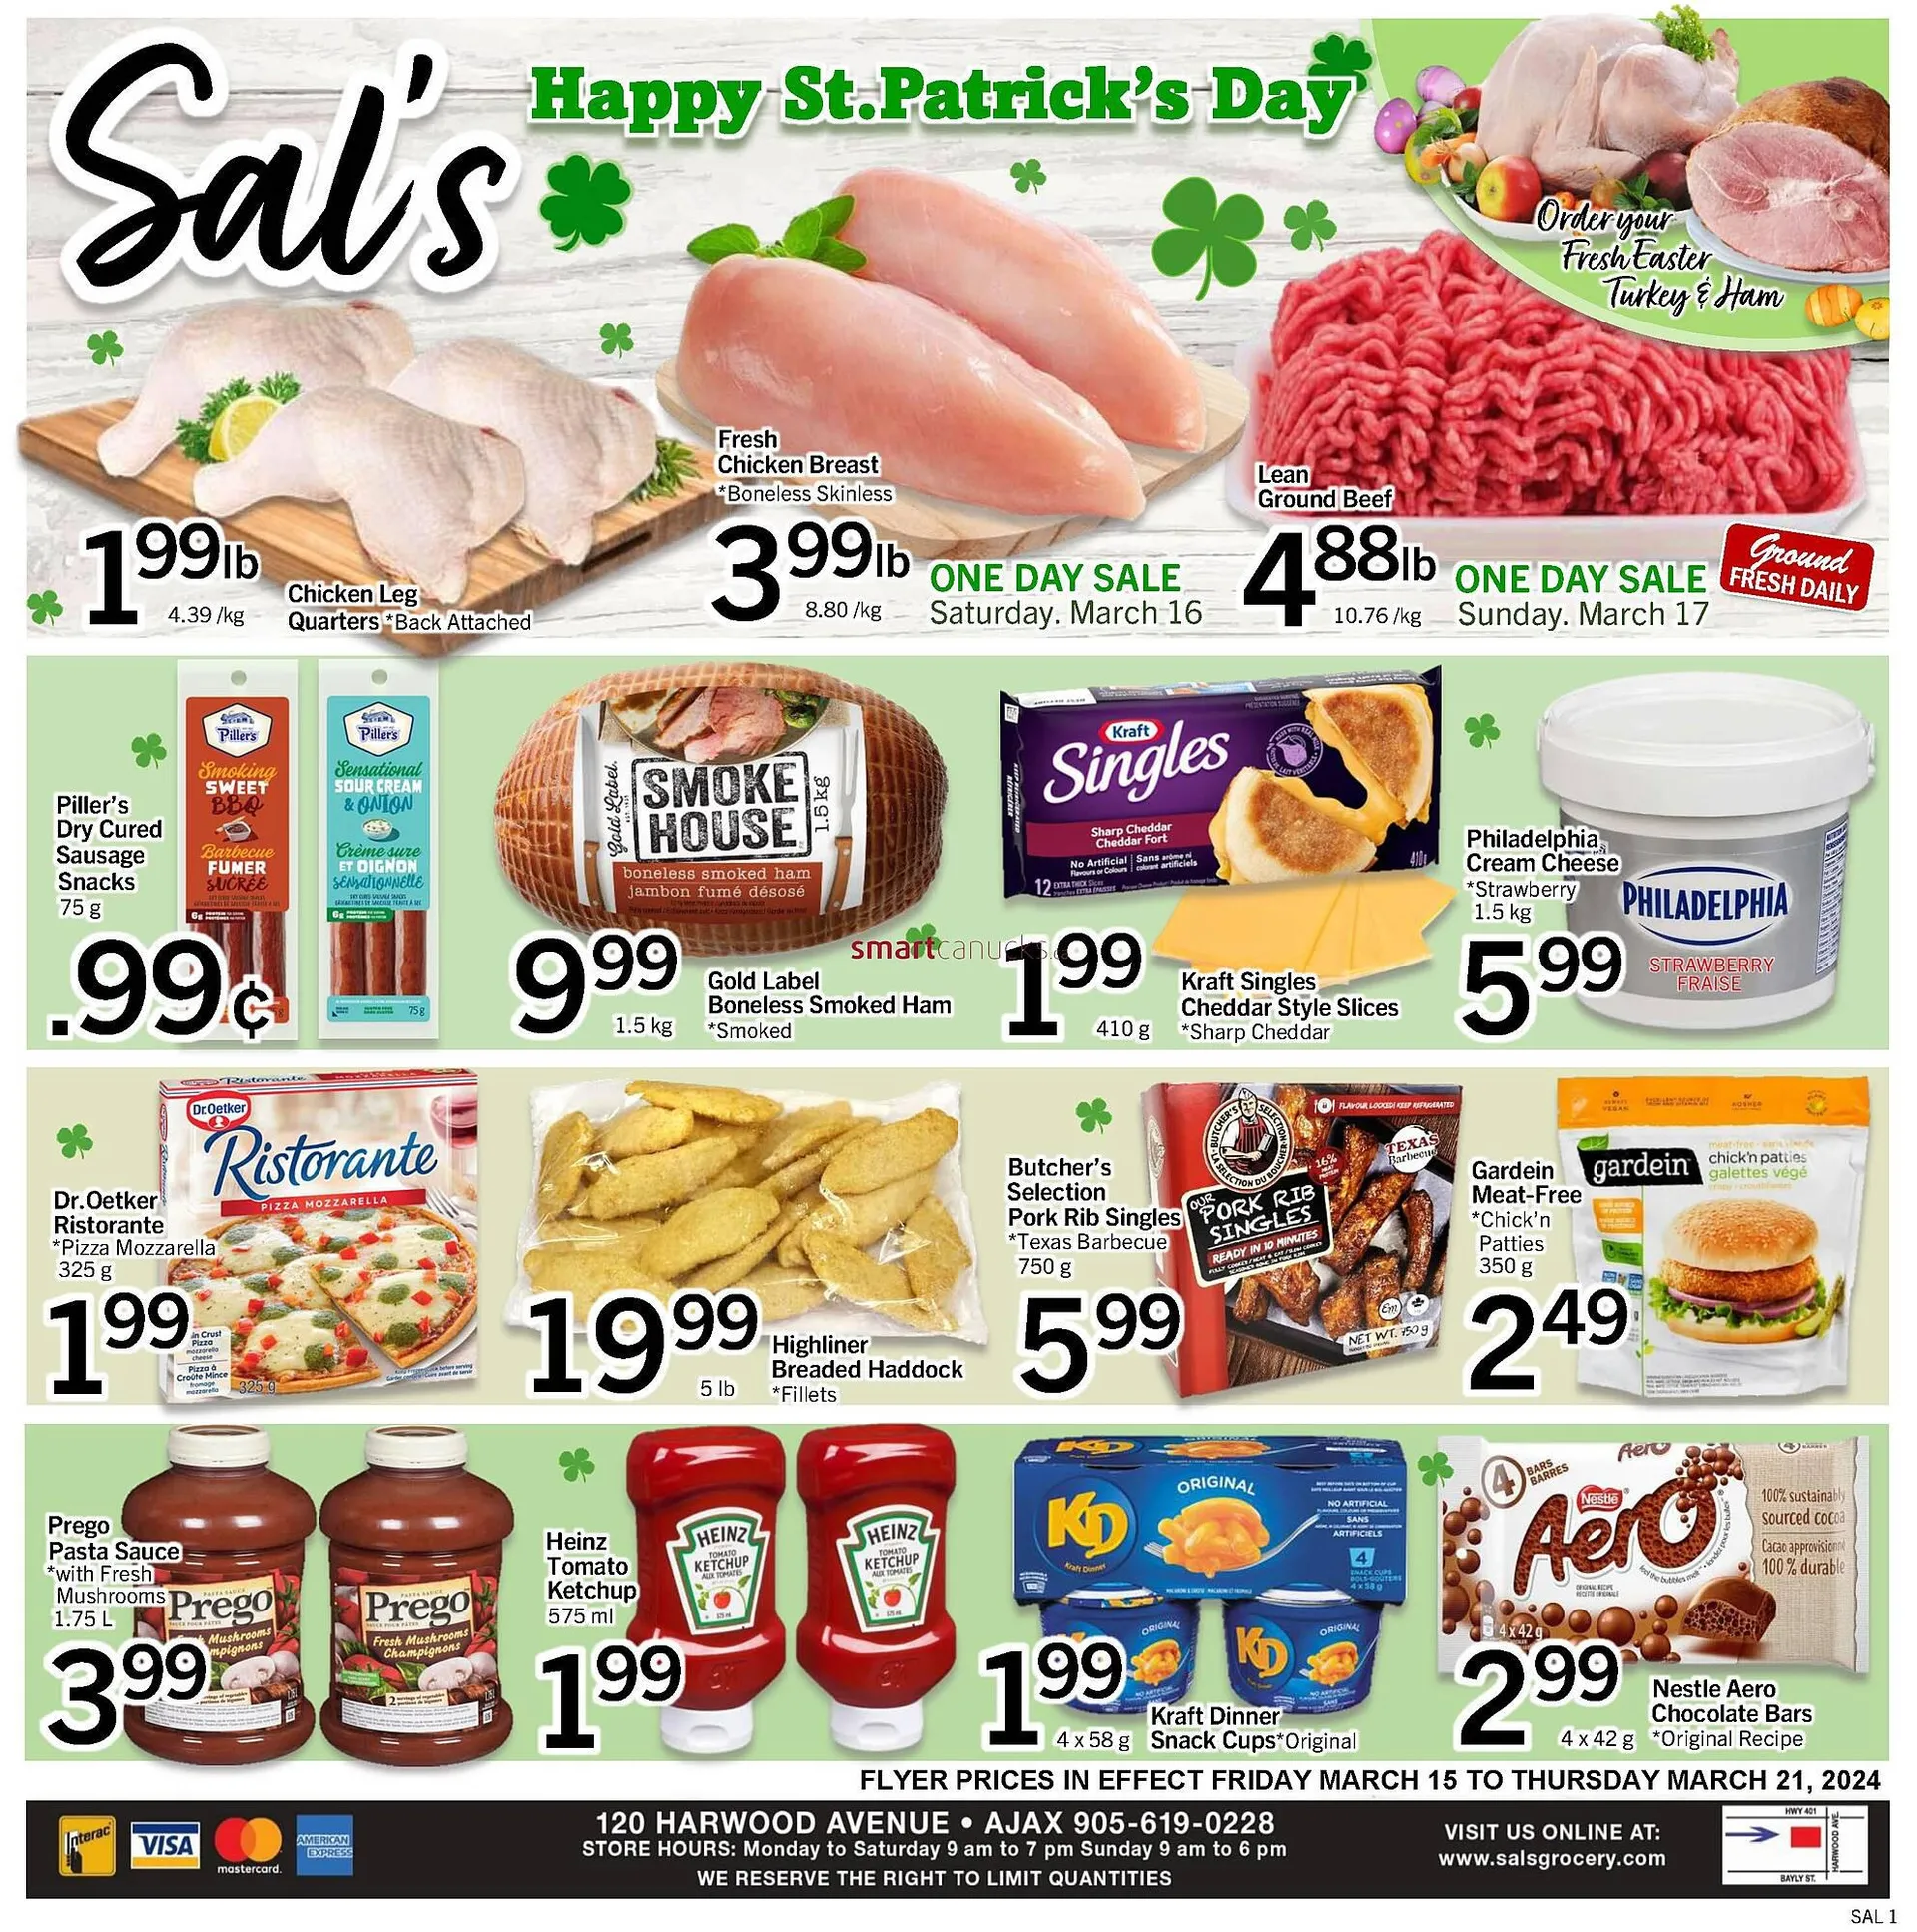 Sal's Grocery flyer from March 15 to March 21 2024 - flyer page 1